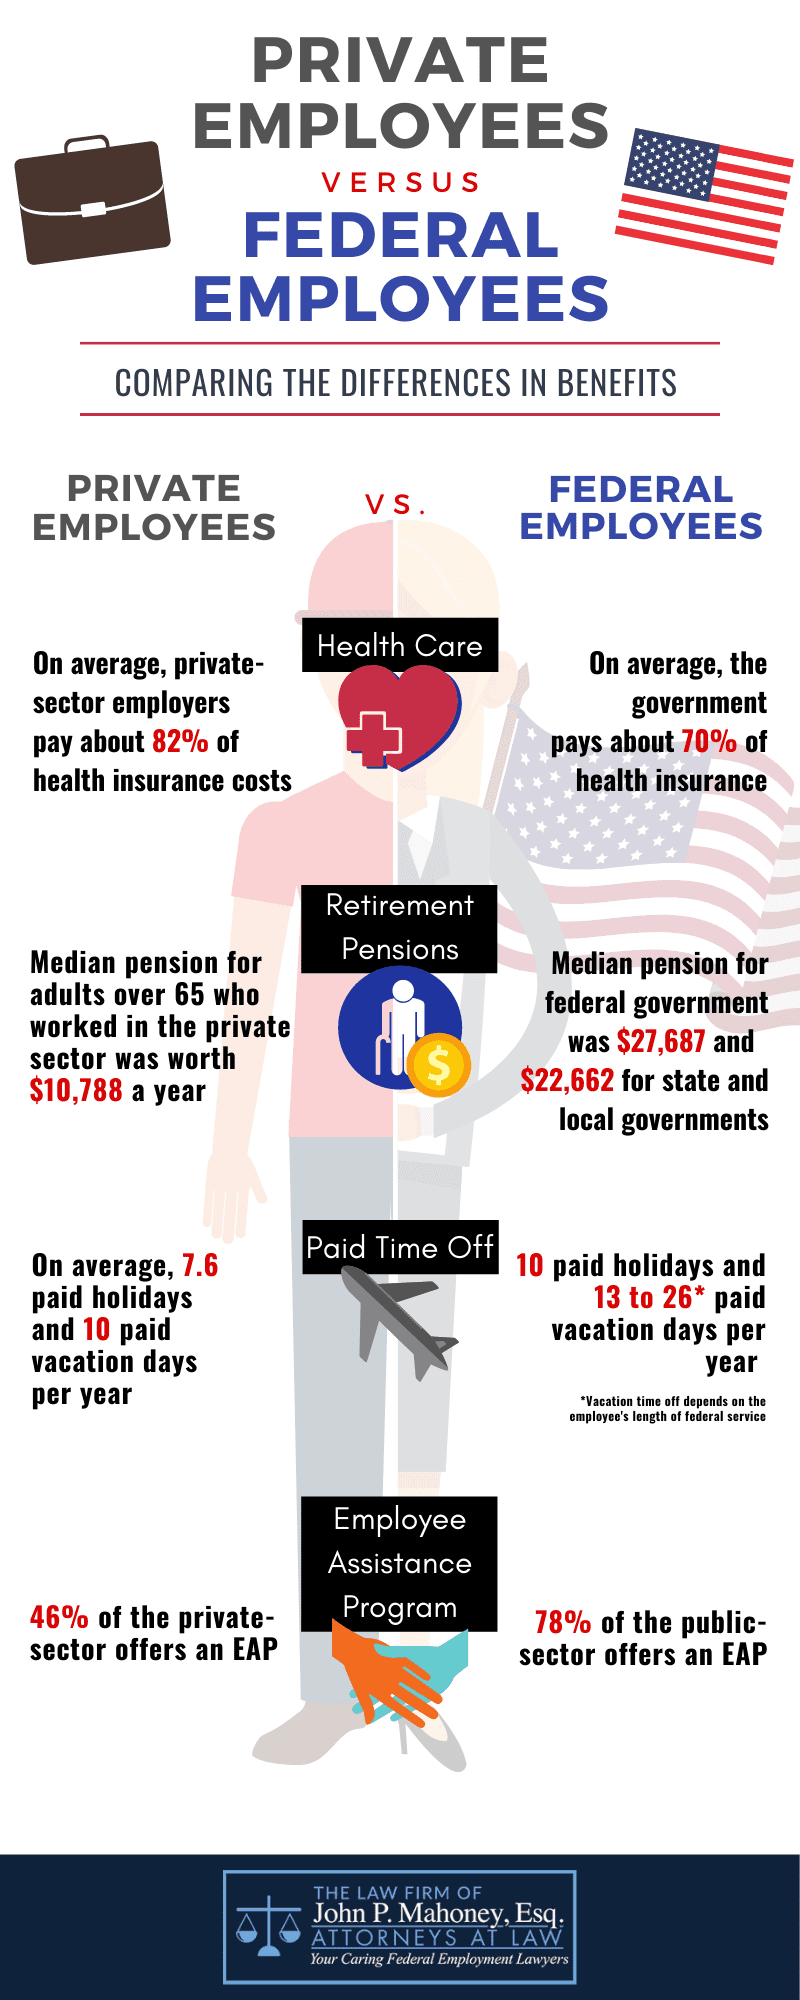 Private Employees Versus Federal Employees: Comparing the Differences in Benefits (Infographic)